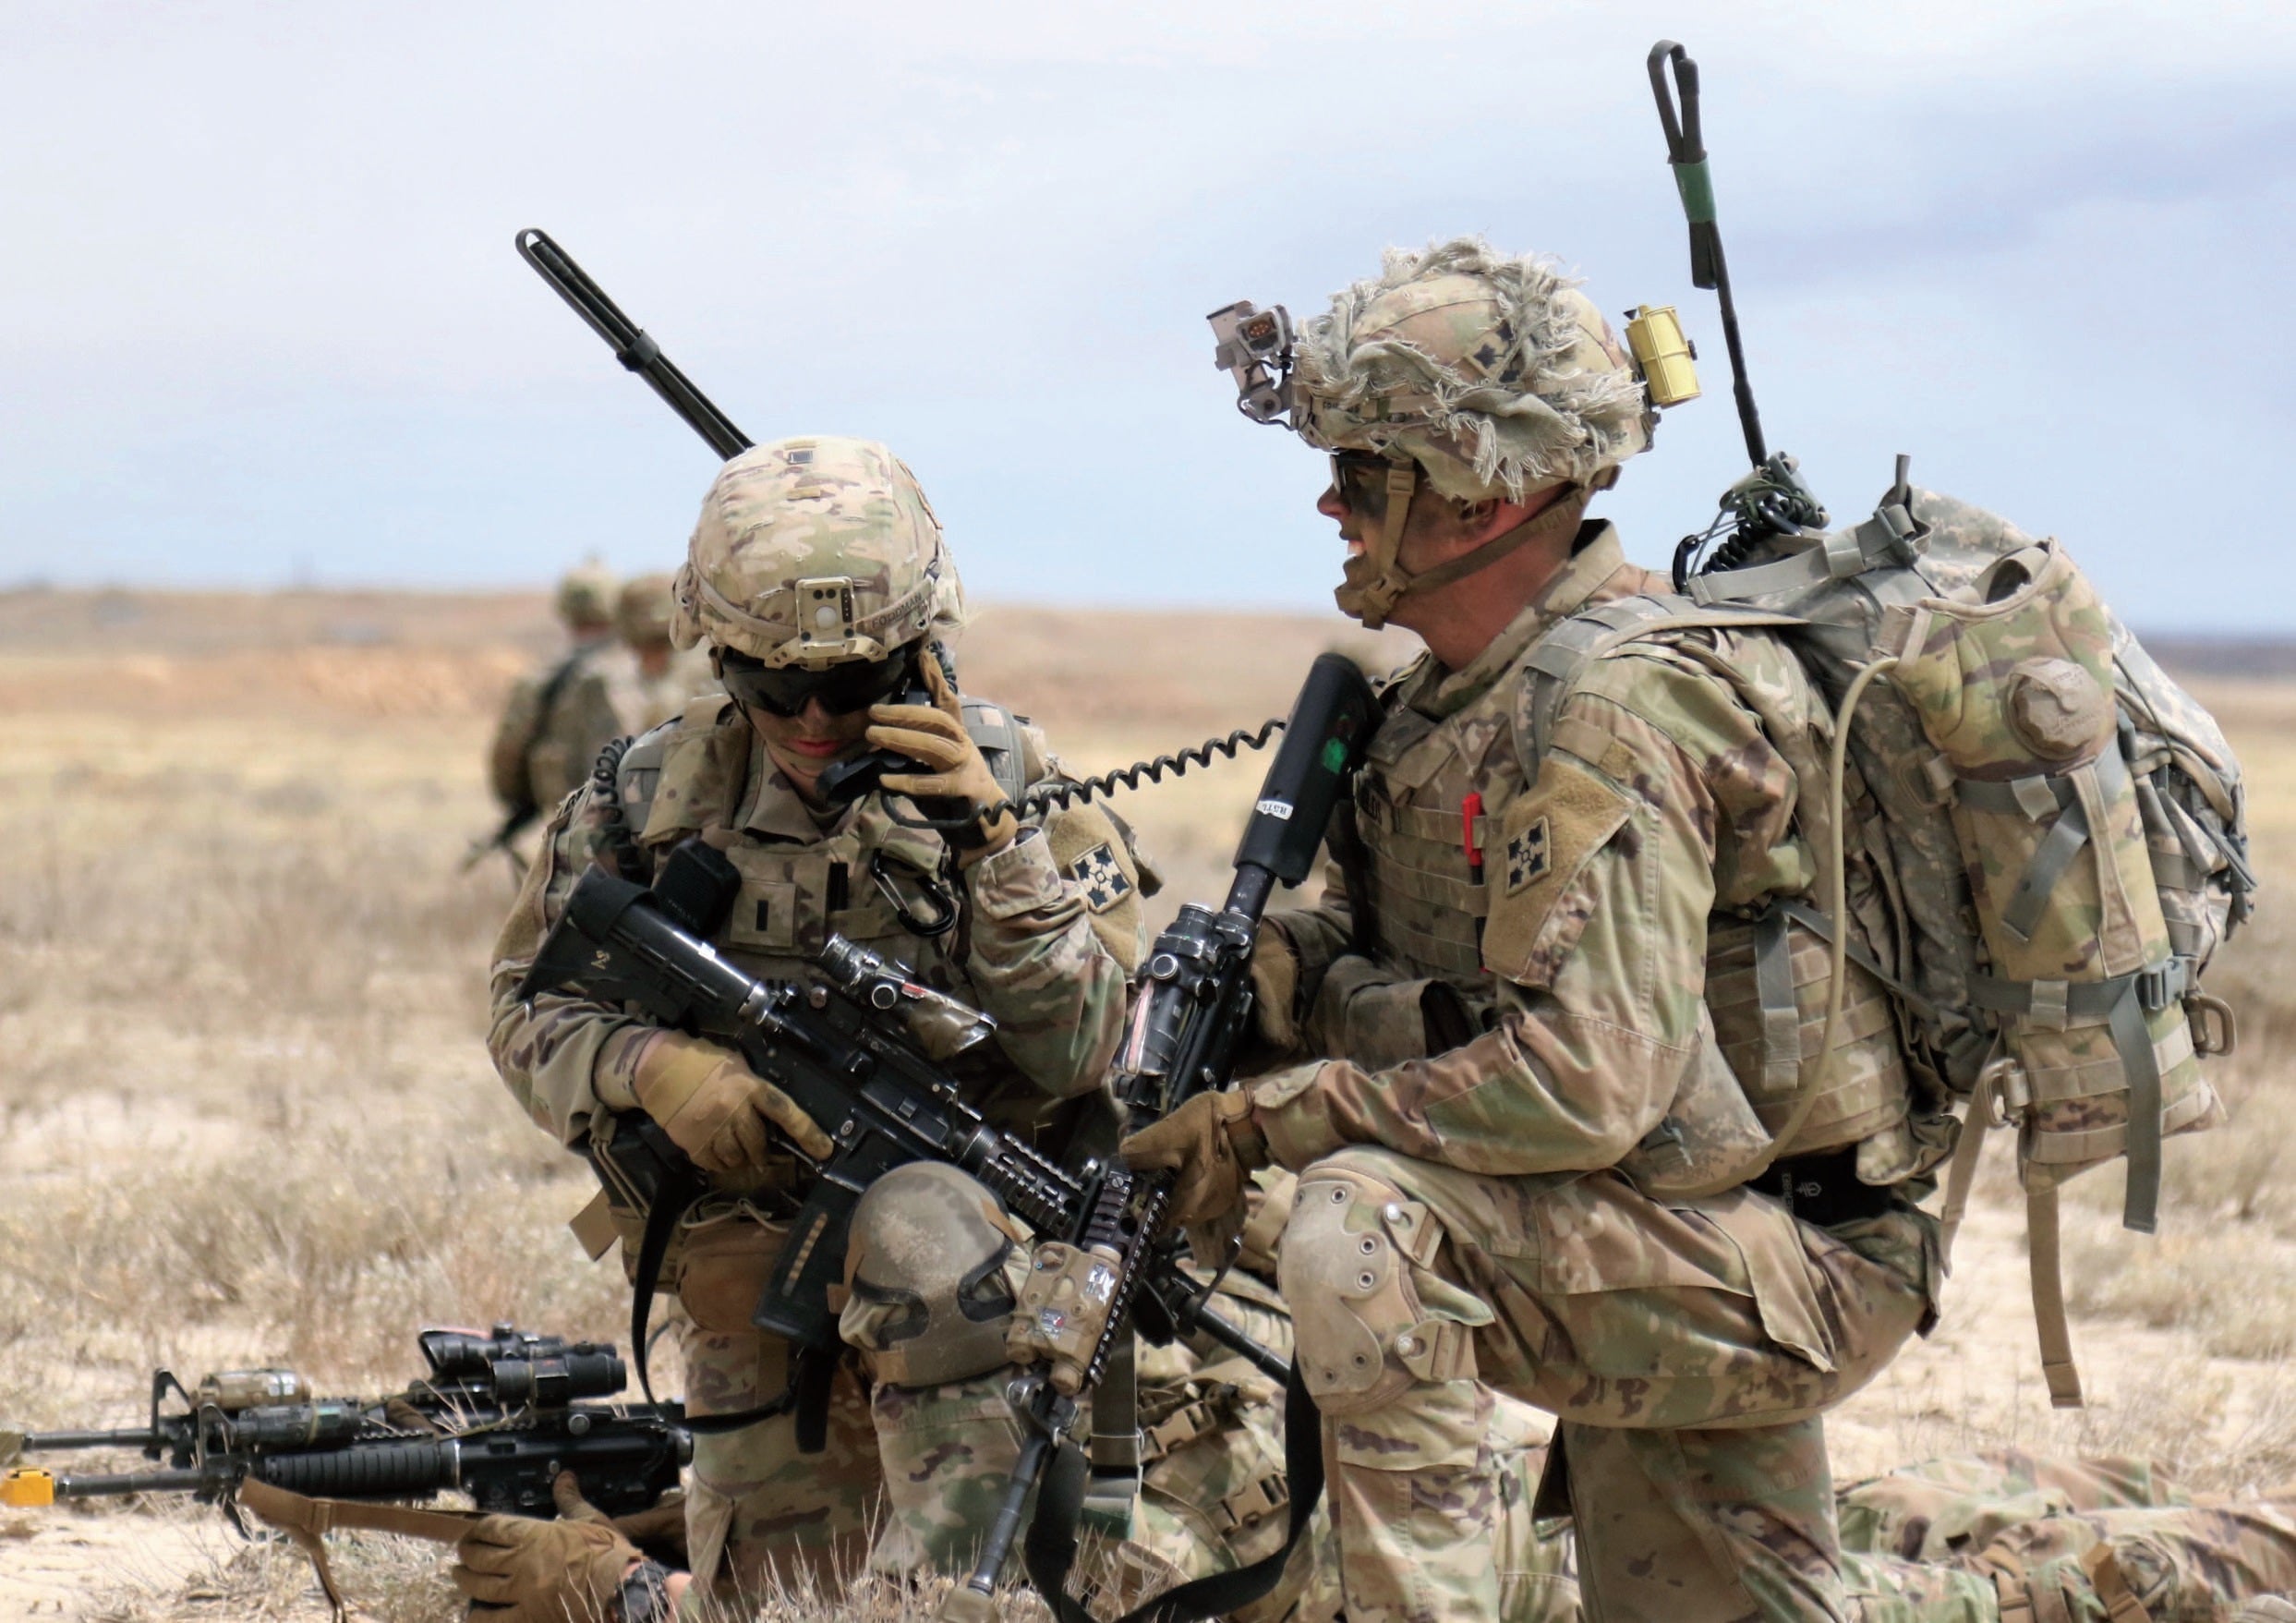 Soldiers with the 2nd Brigade Combat Team, 4th Infantry Division, coordinate movement during a brigadewide exercise at Fort Carson, Colorado. (Credit: U.S. Army/Maj. Jason Elmore)